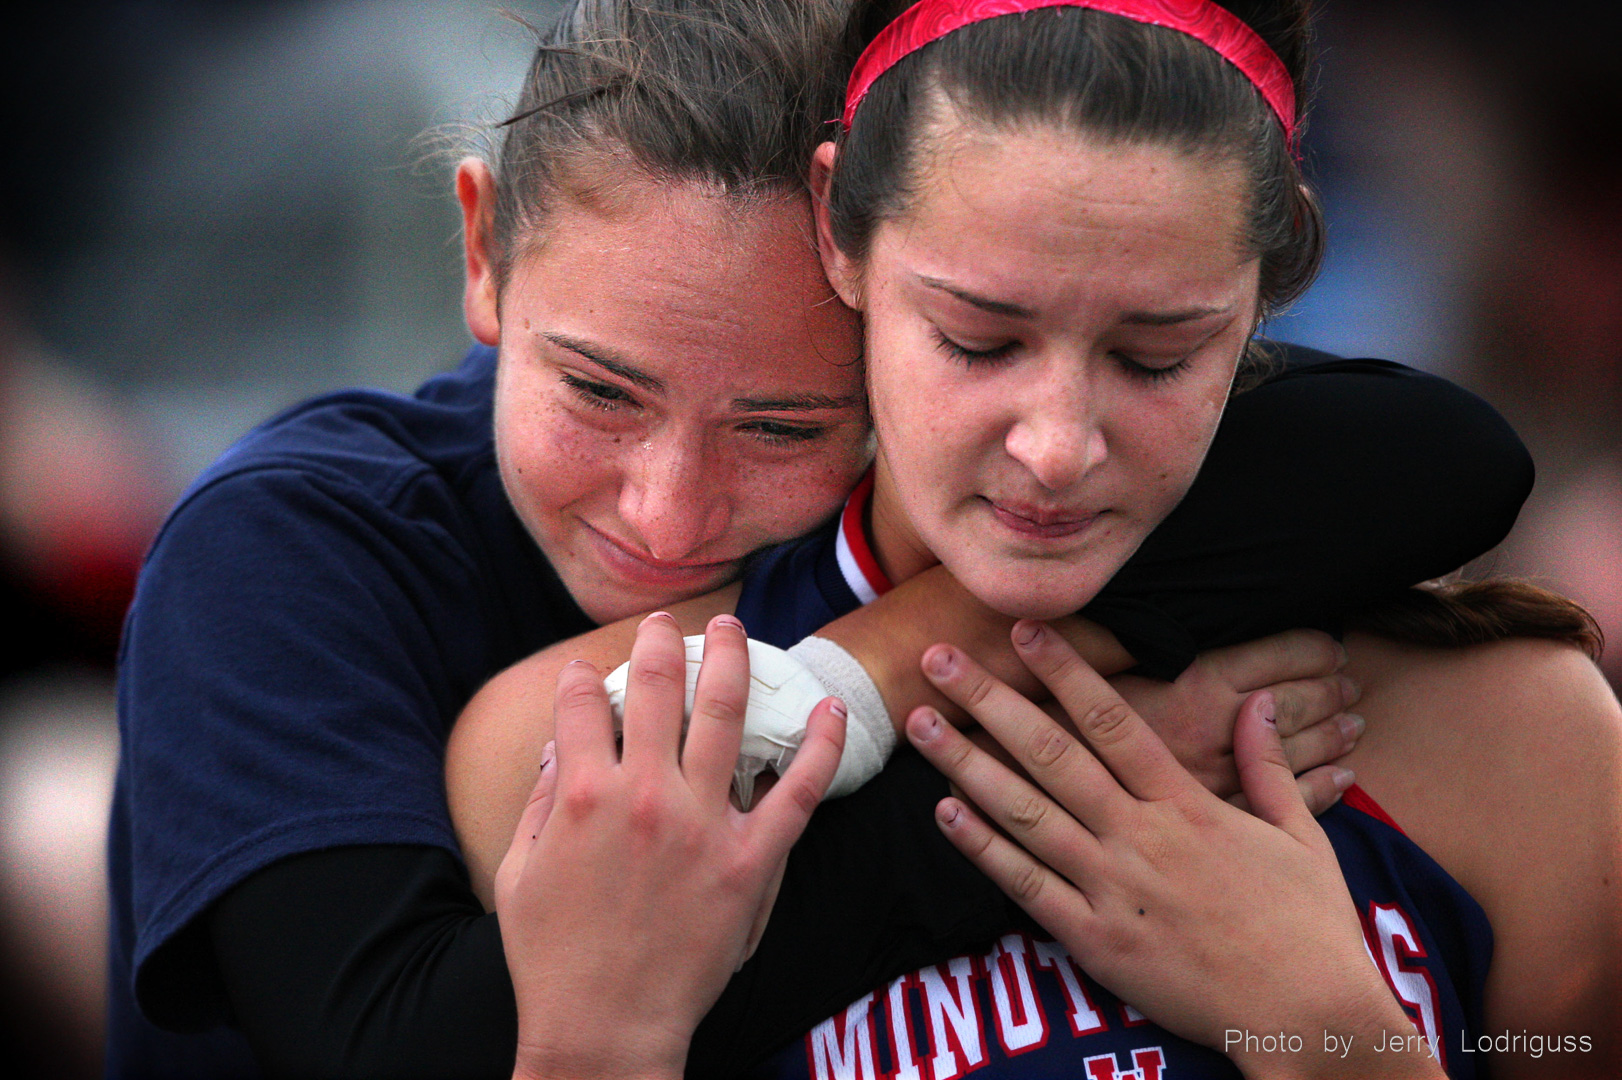 Washington Township's Zoey Miller (left) cries as she embraces teammate Sam DiCastelnuovo after their loss to Eastern in a south Jersey Group 4 field hockey semifinal game at Eastern High School in Voorhees, NJ on November 6, 2008.